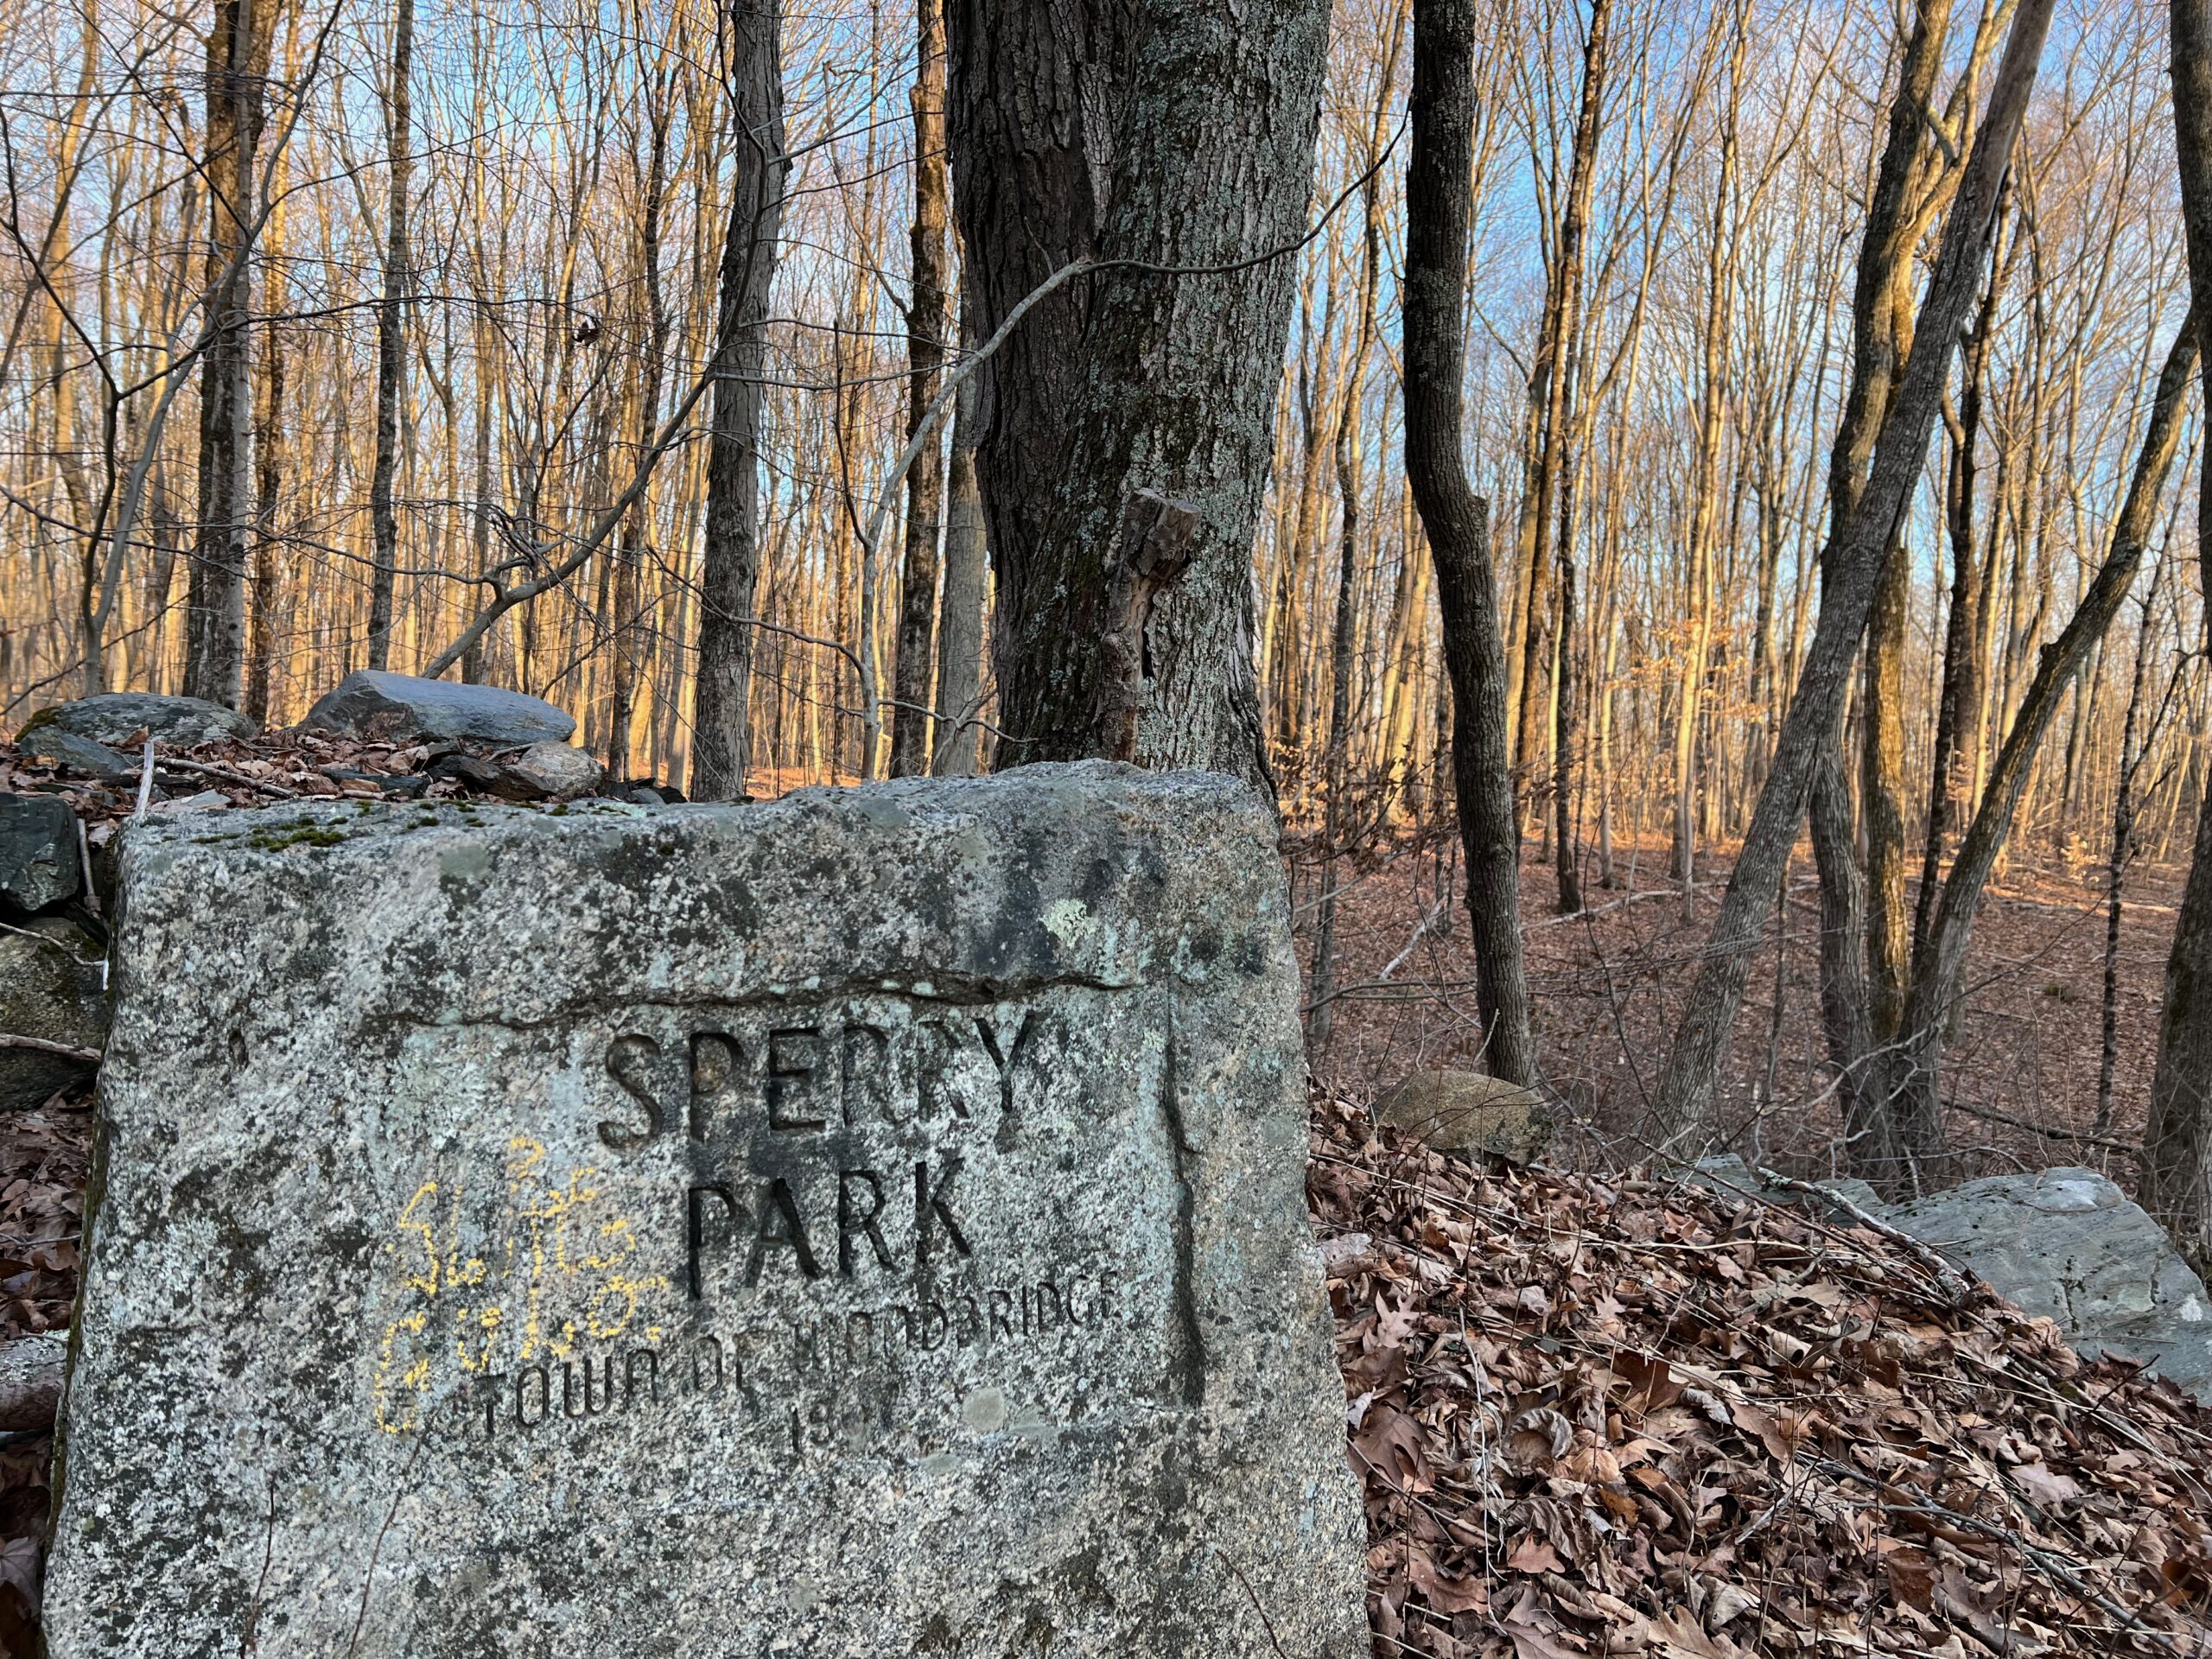 History of Sperry Park